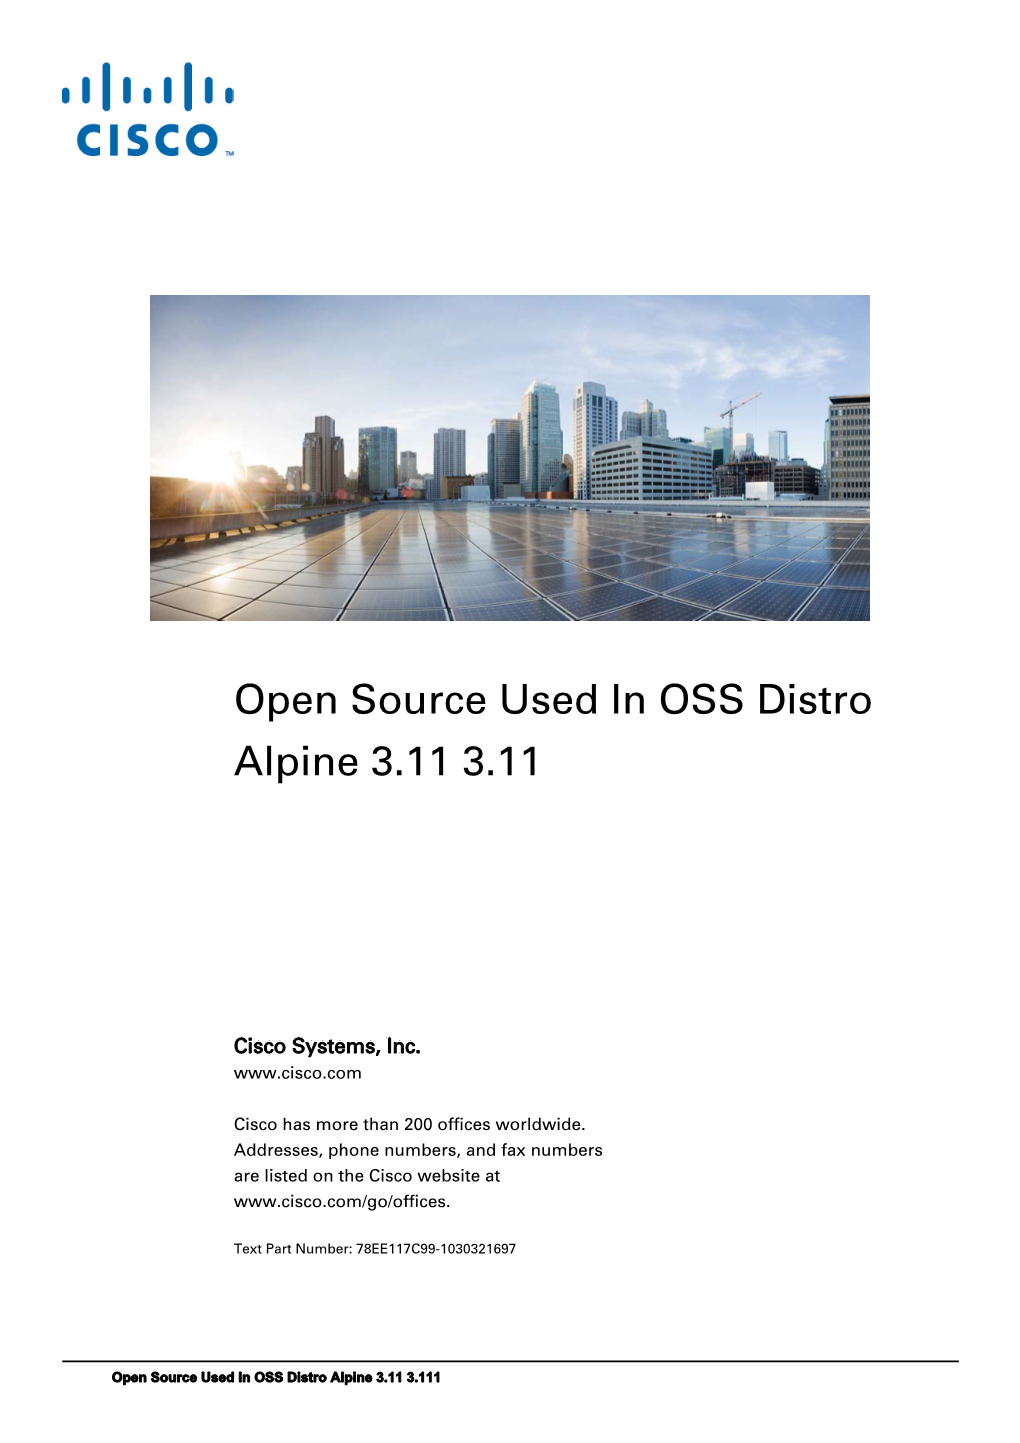 Open Source Used in OSS Distro Alpine 3.11 3.11